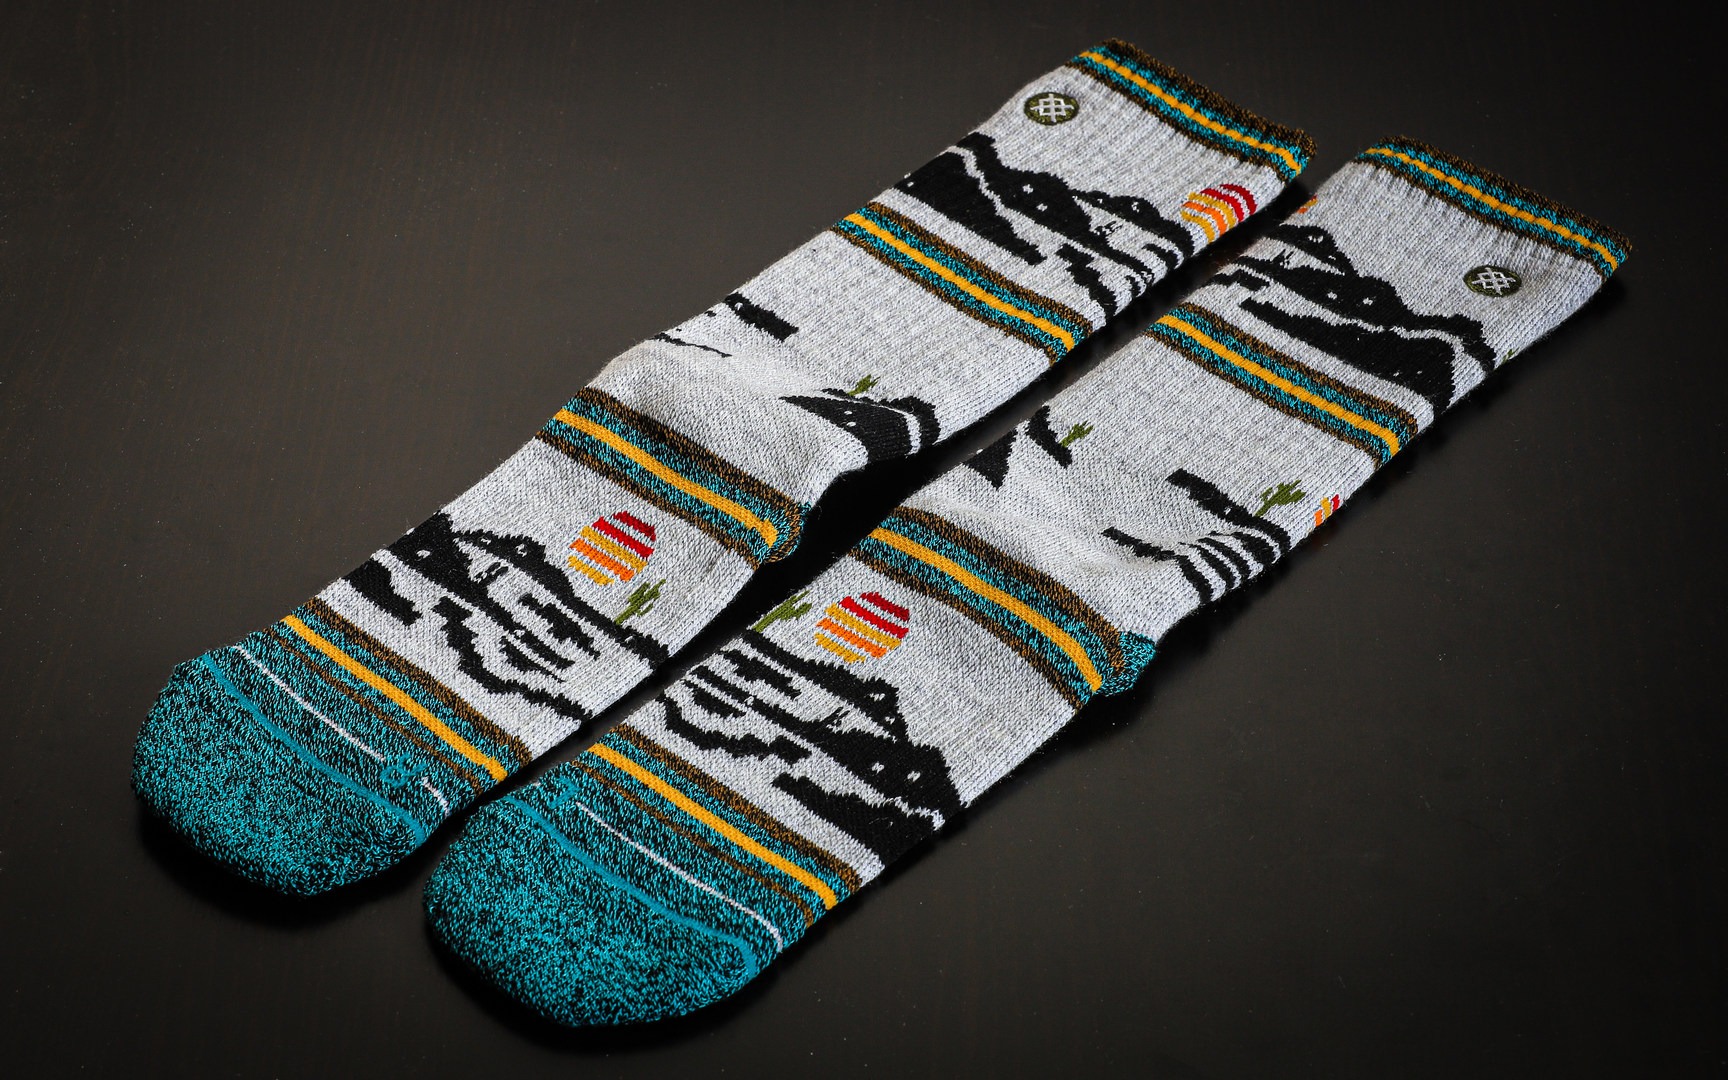 STANCE Socks Designs Long Thick 